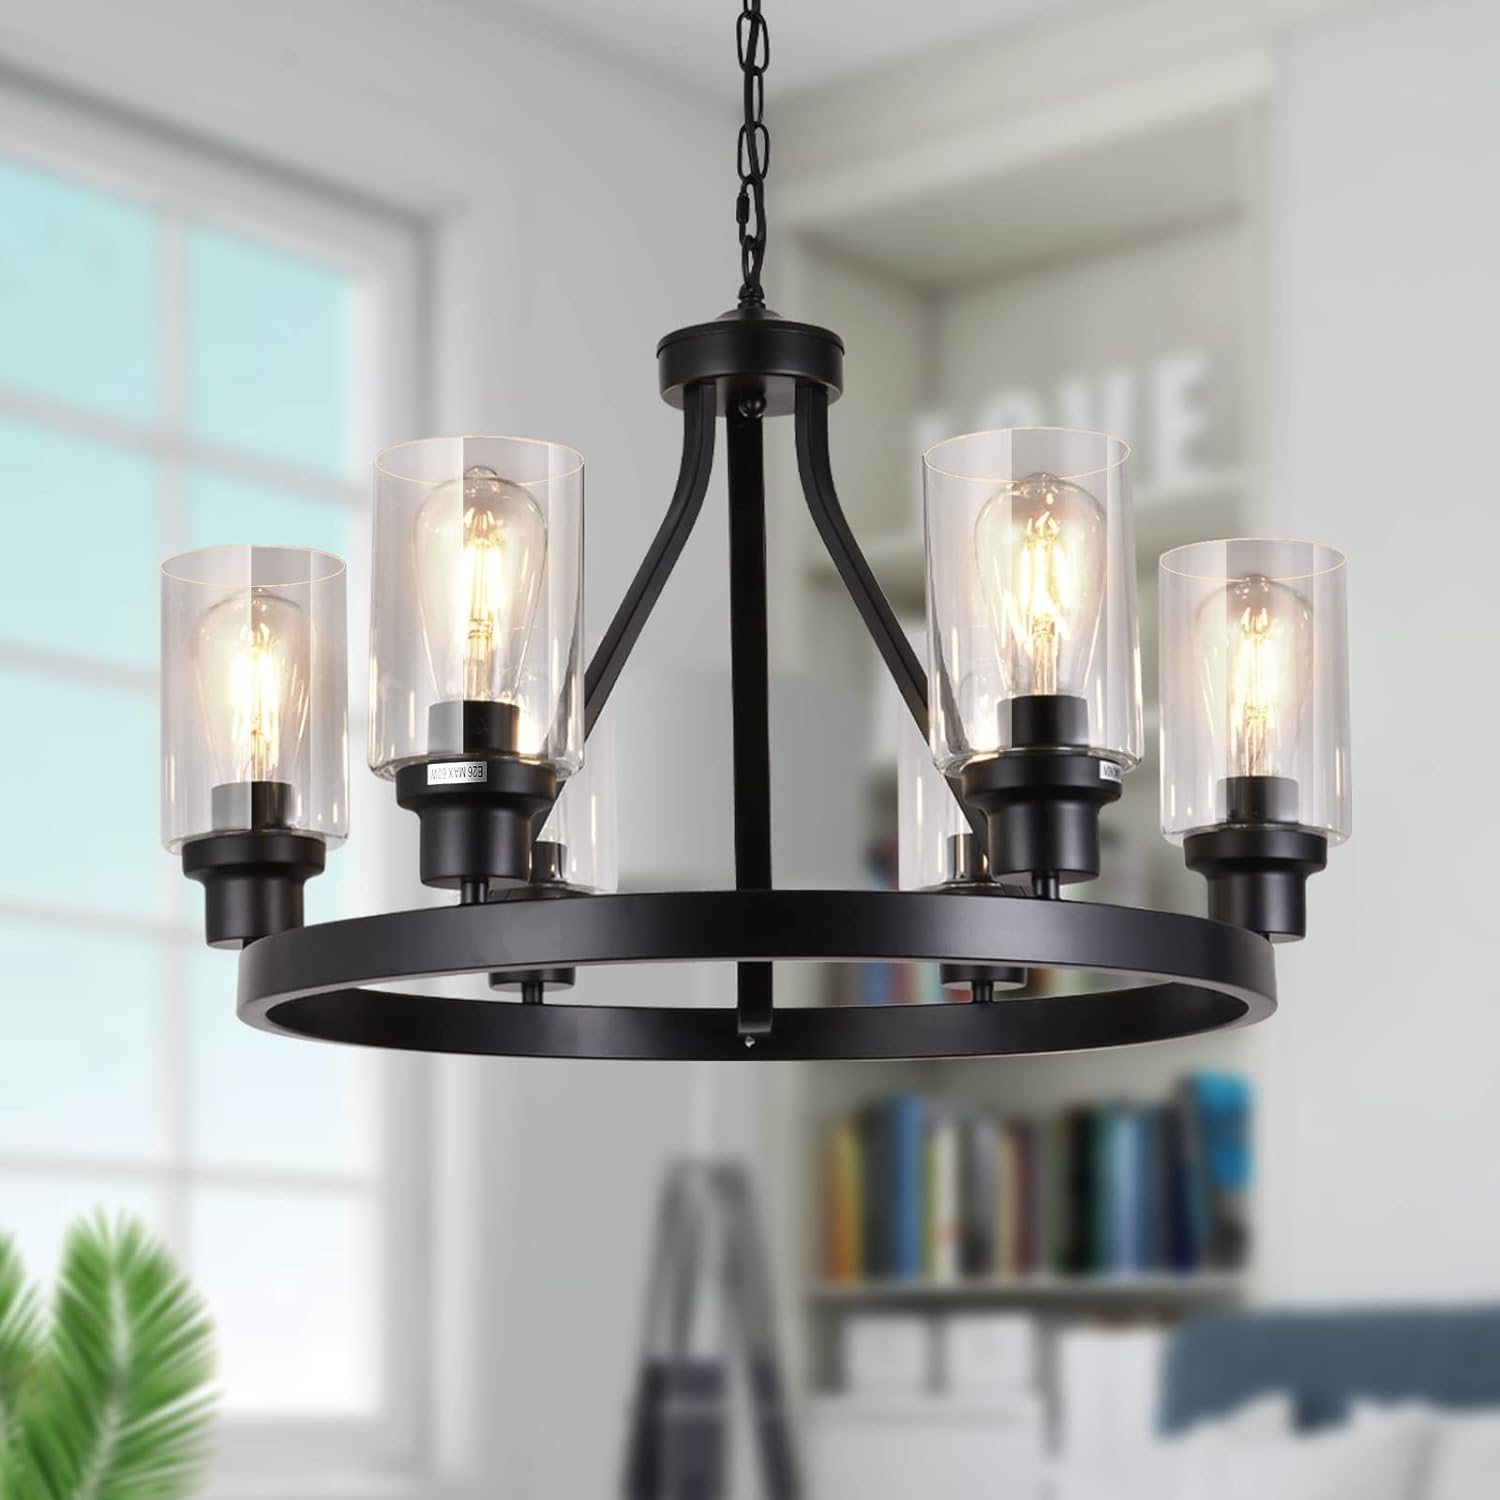 farmhouse style chandeliers for the dining room